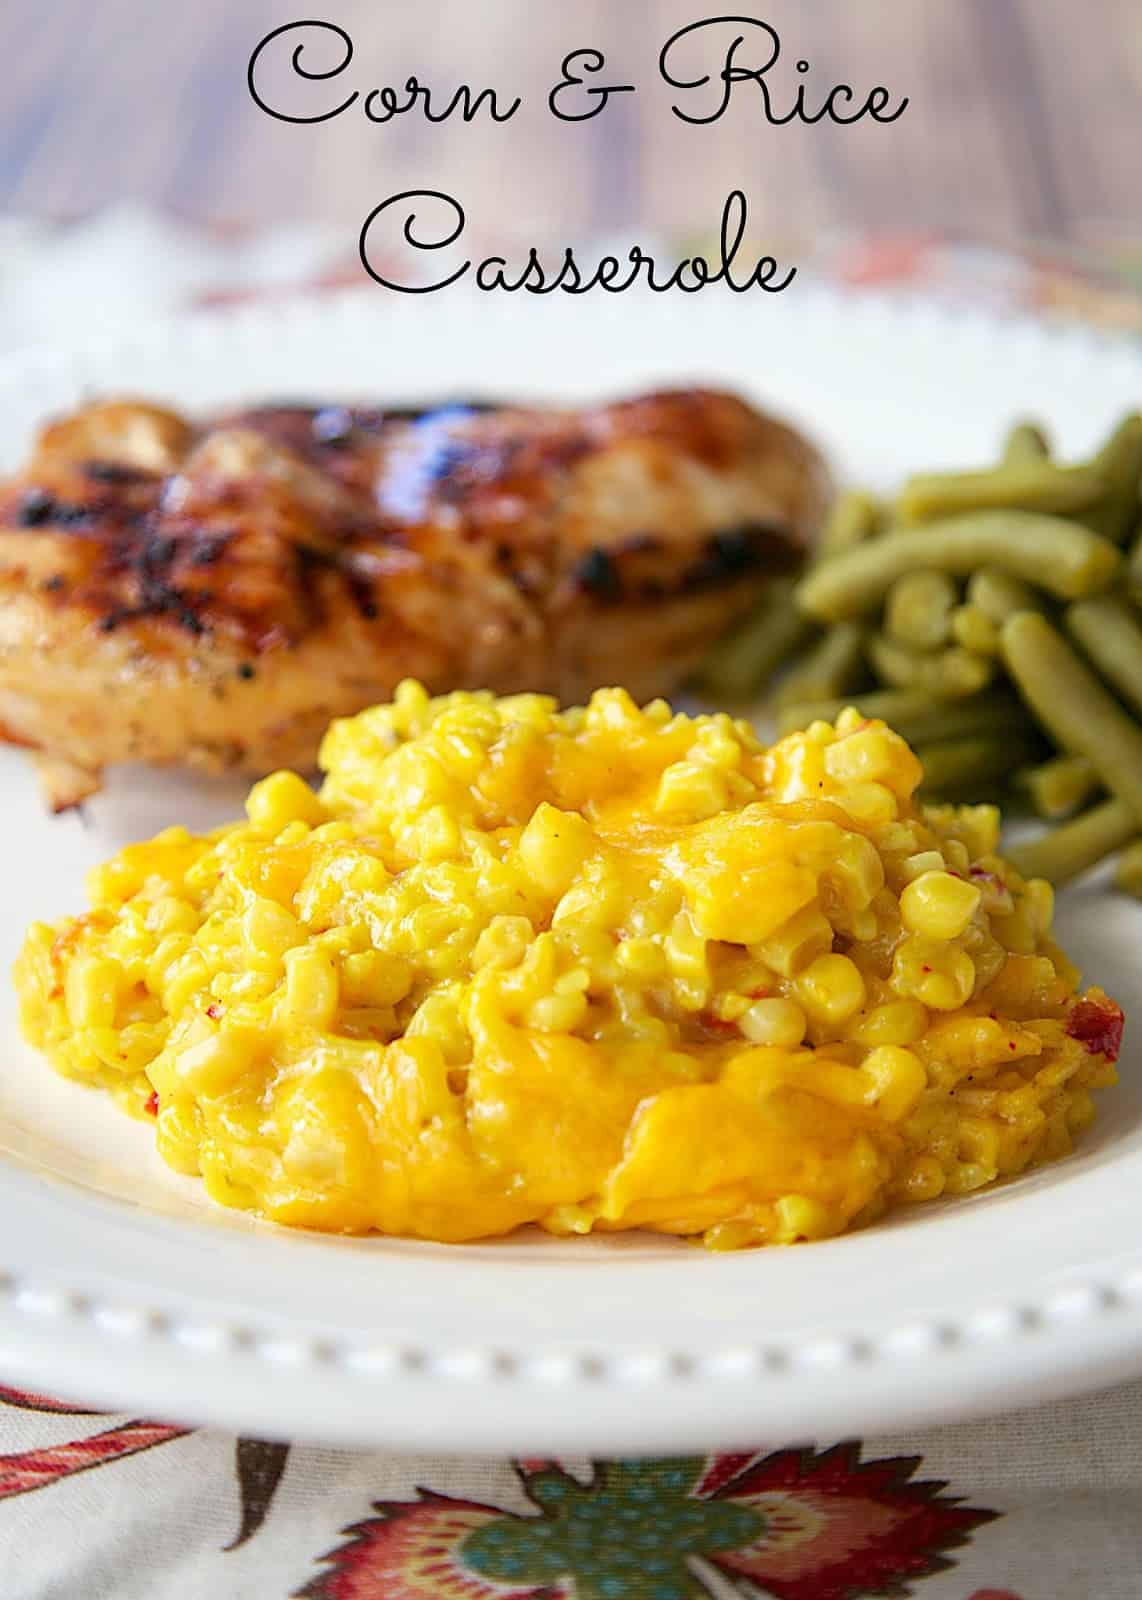 Corn and Rice Casserole - only 4 ingredients! Corn, Rice, Soup & Cheese. It is THE BEST corn casserole I've ever eaten! Can be made ahead of time. Quick side dish recipe!